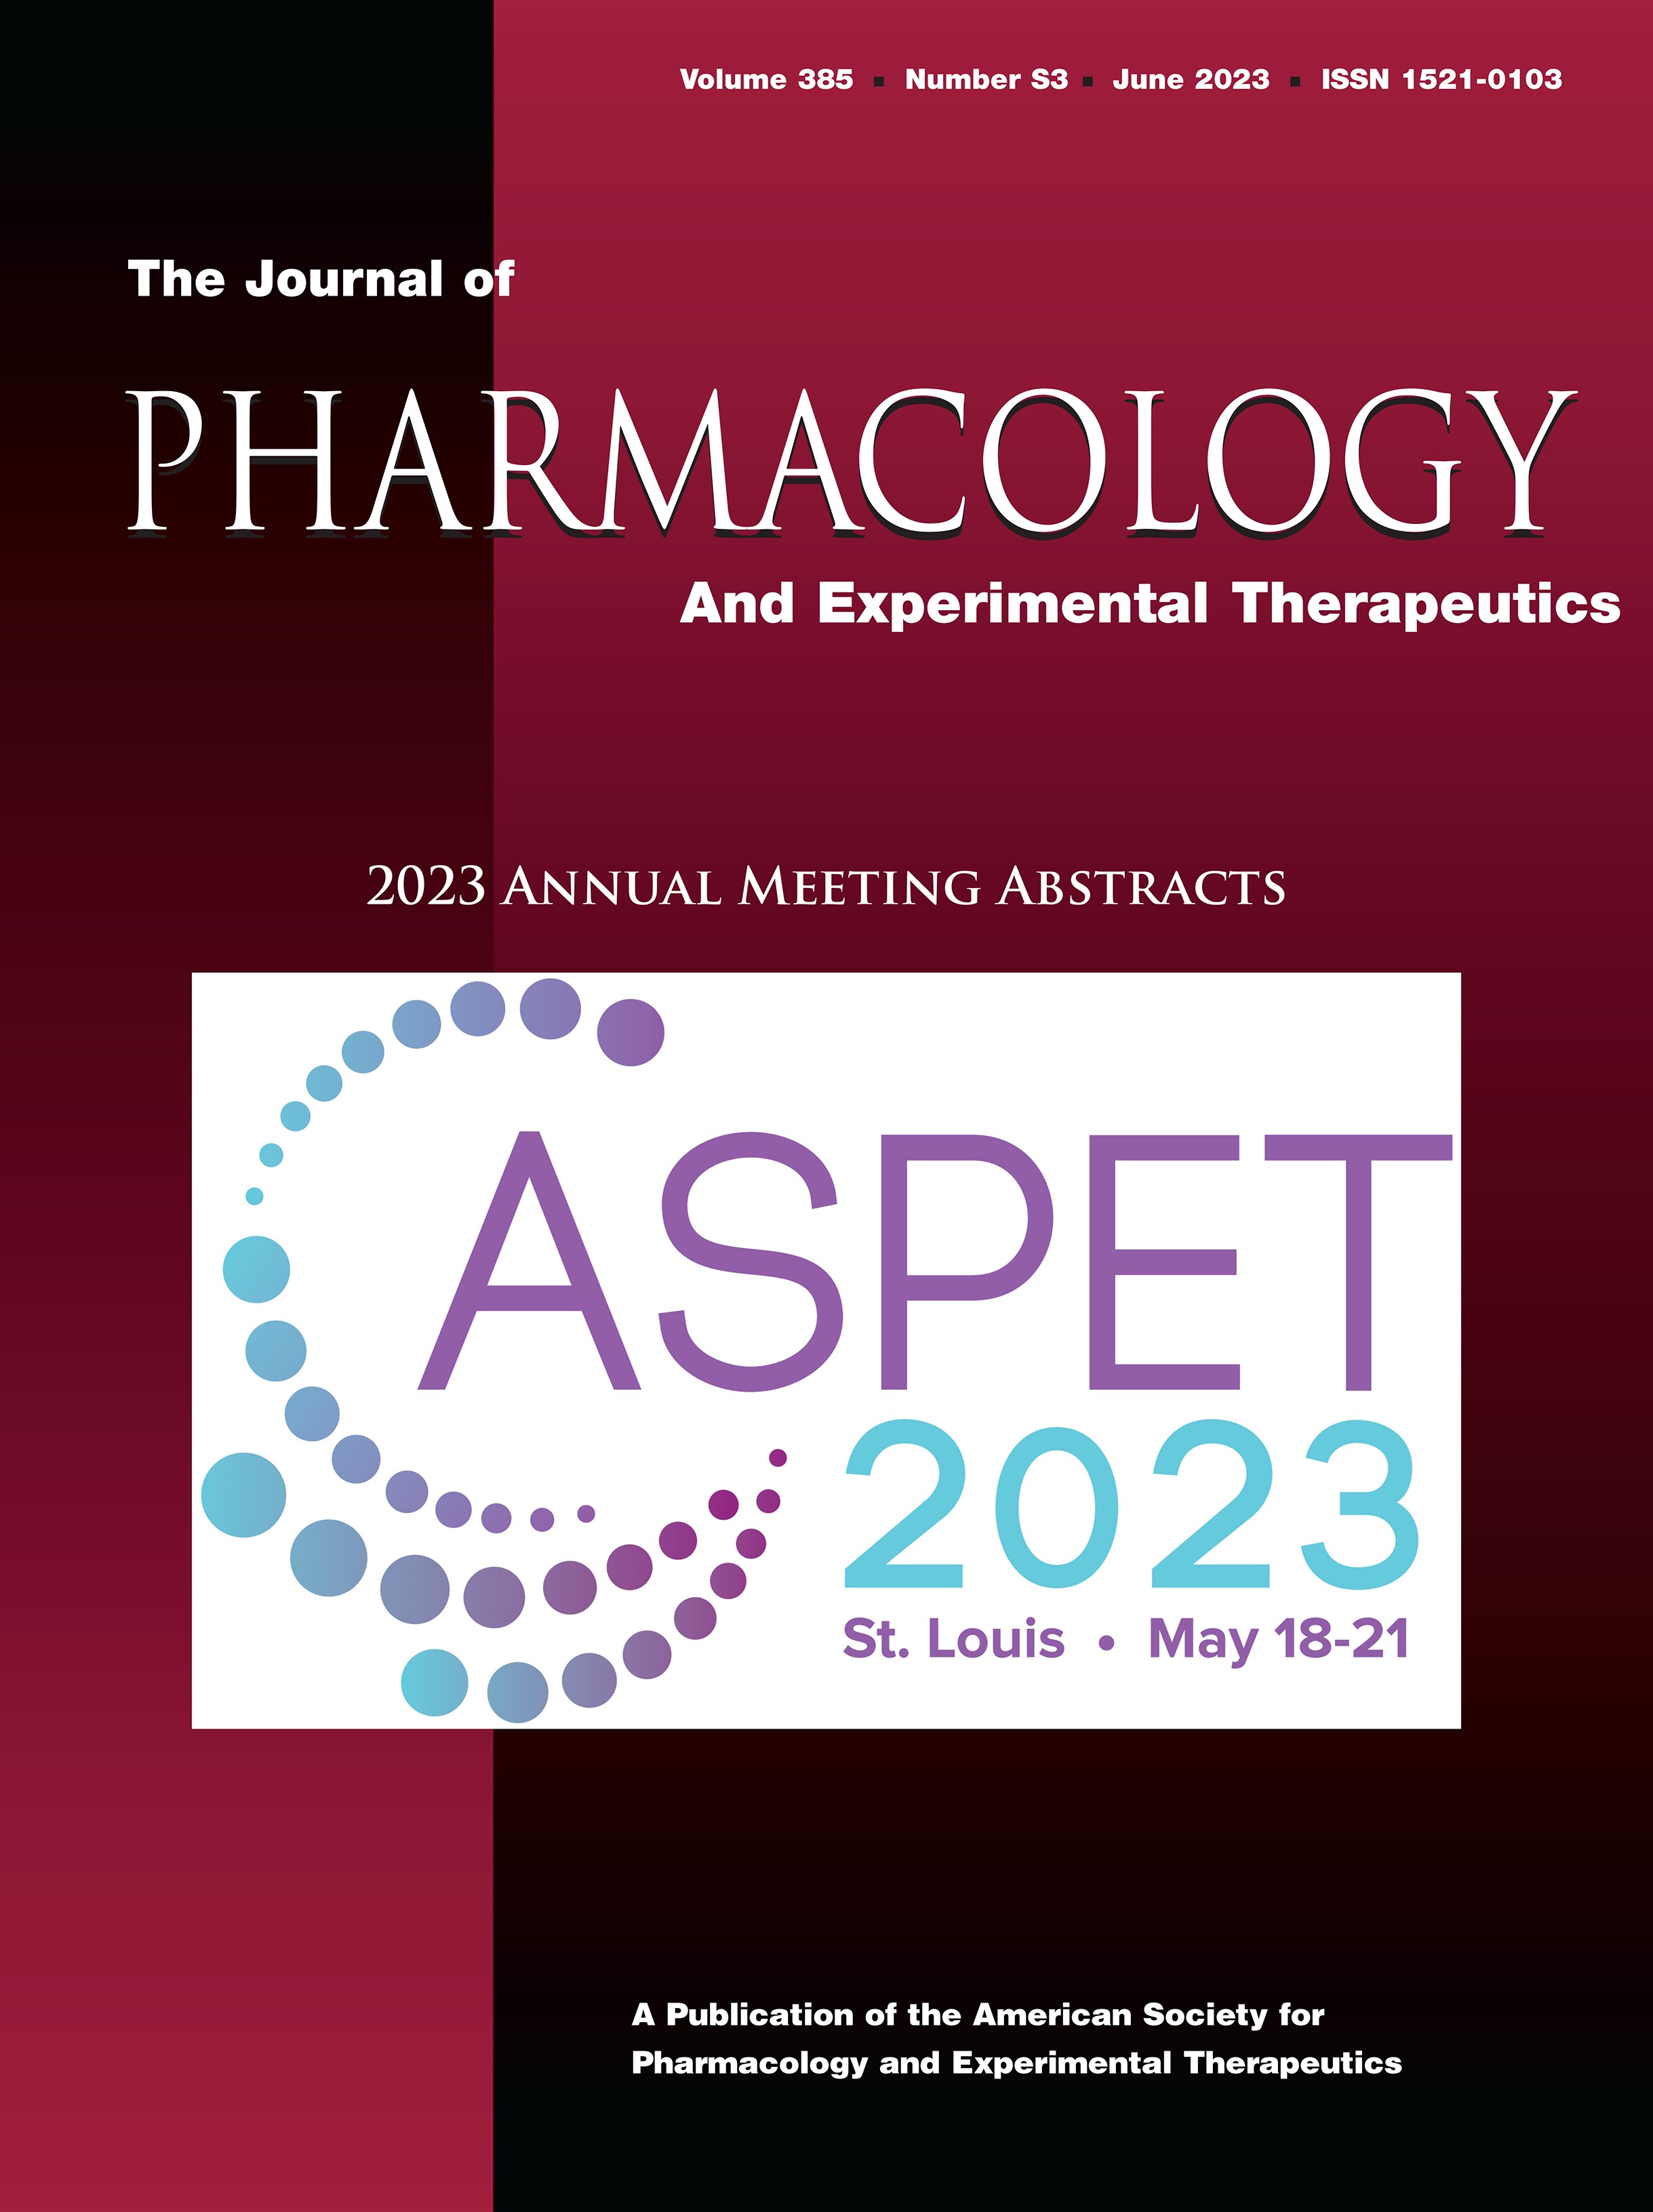 Clopidogrel Induces More Bleeding in P2Y12-deficient Mice: Optimization of Murine Tail Bleeding Assay [ASPET 2023 Annual Meeting Abstract - Cardiovascular Pharmacology]